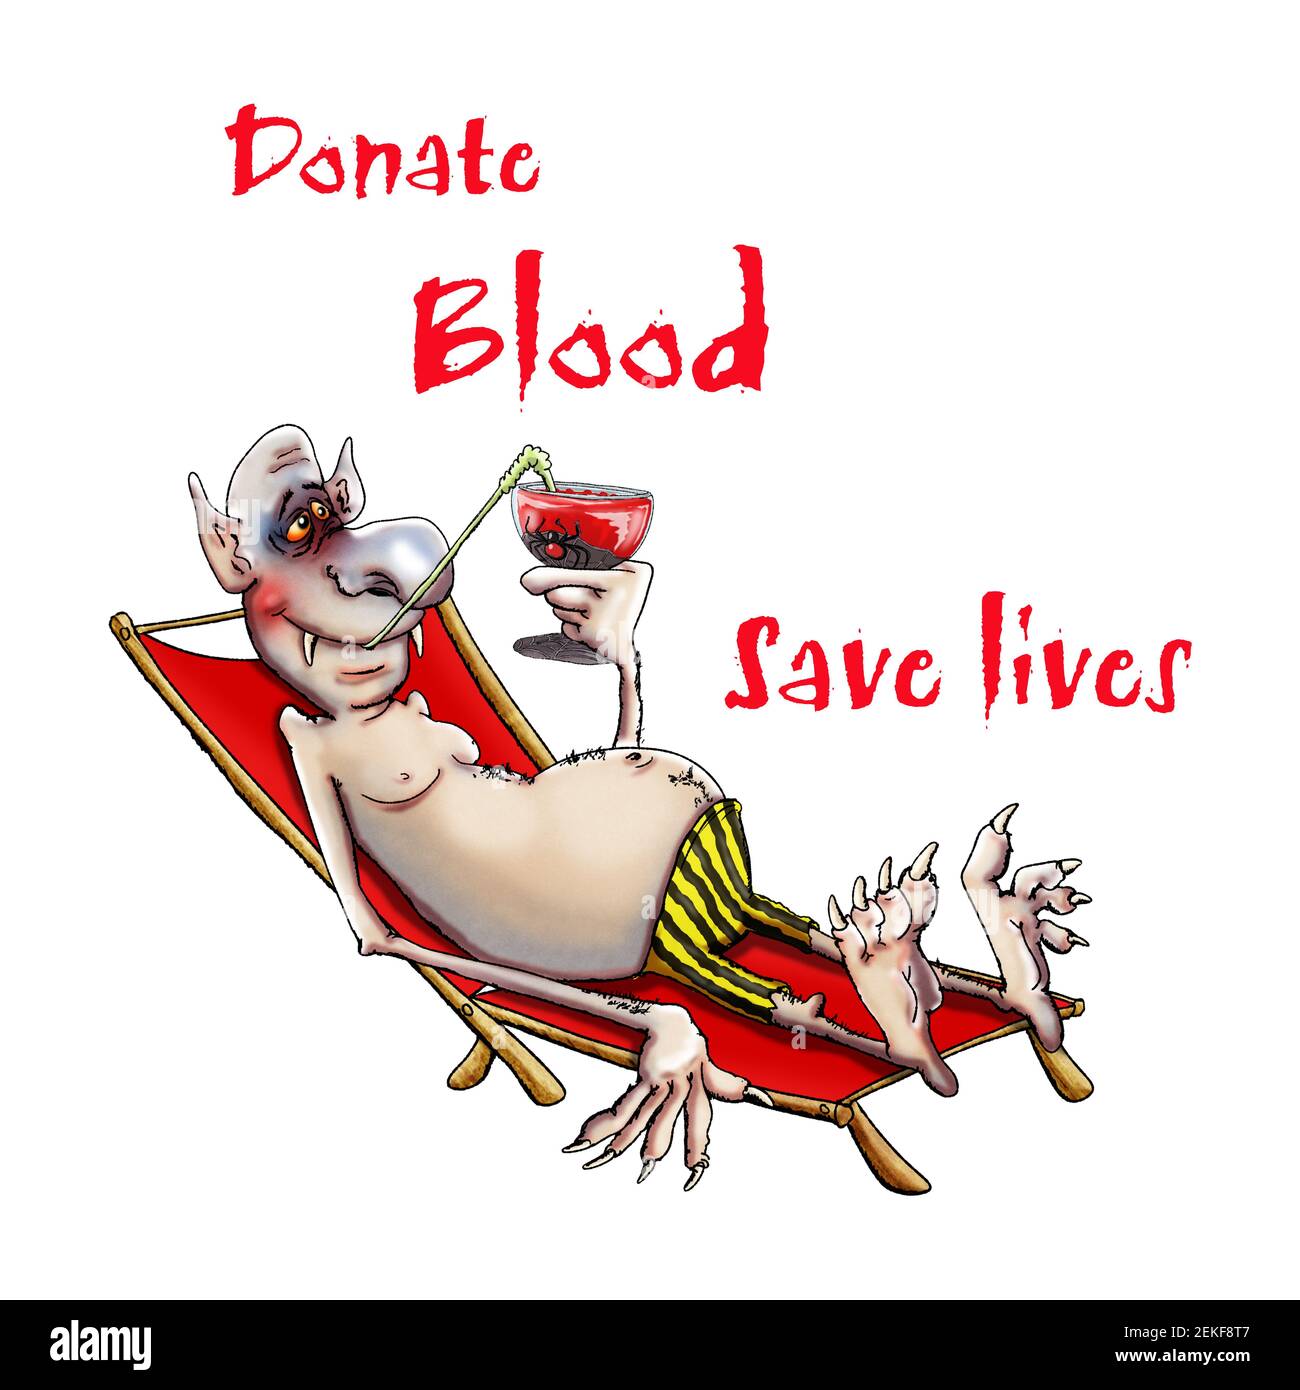 Vampire dracula with a glass of blood. Donate blood save lives. Illustration for prints.. Stock Photo